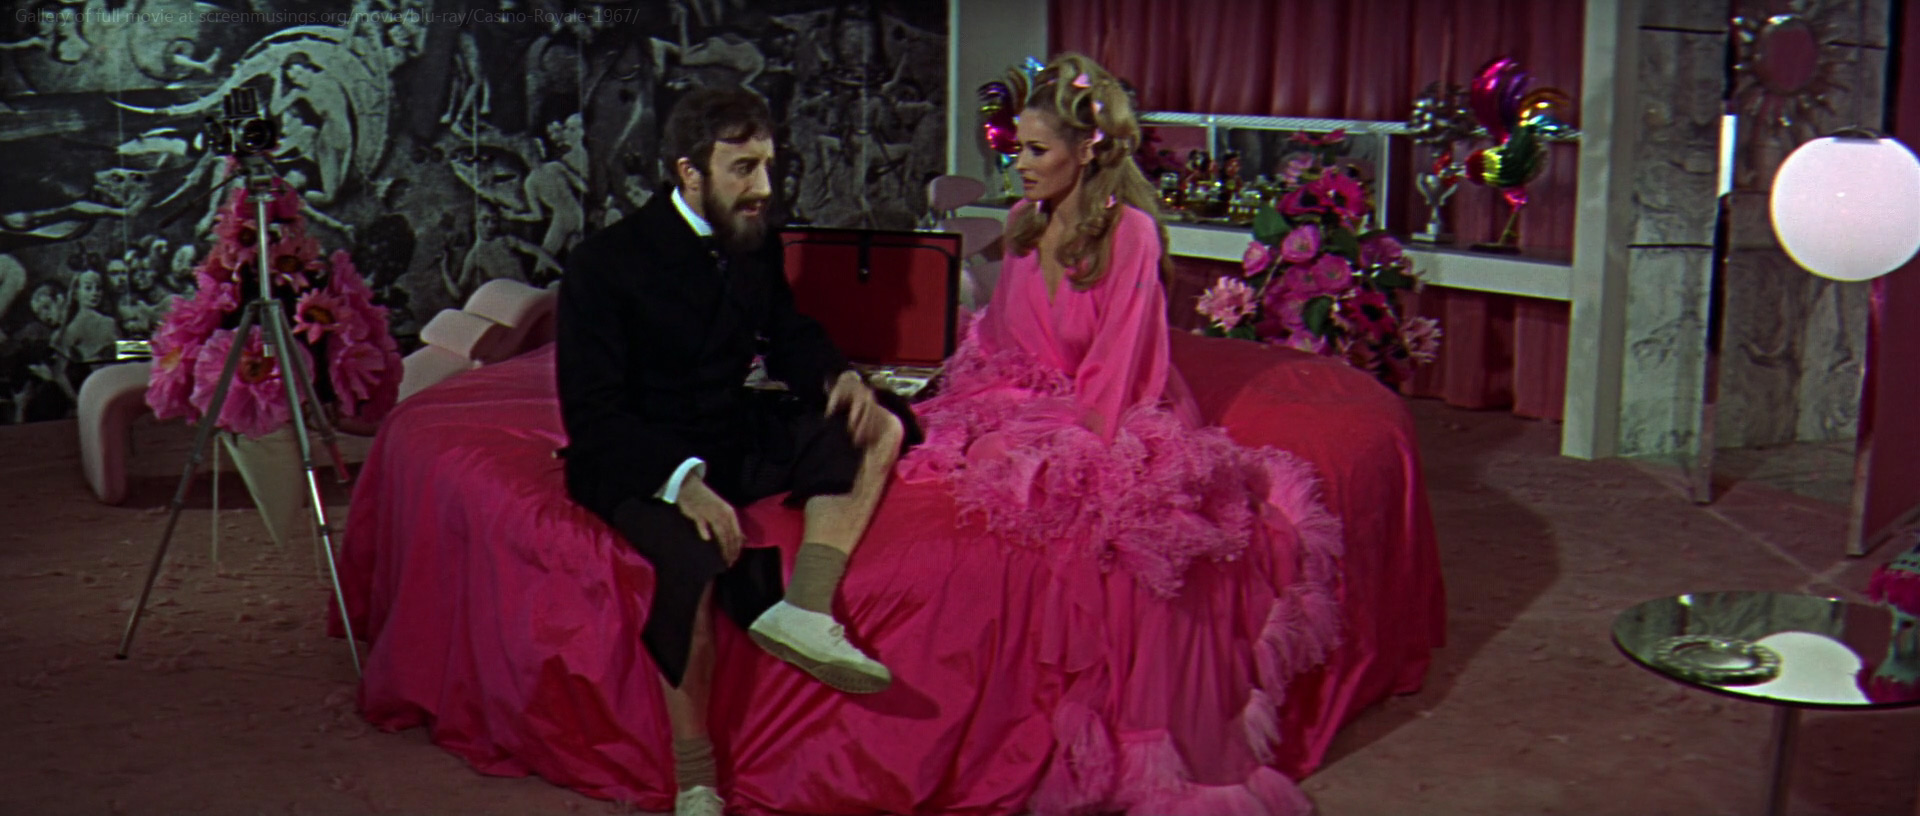 where to stream peter sellers casino royale